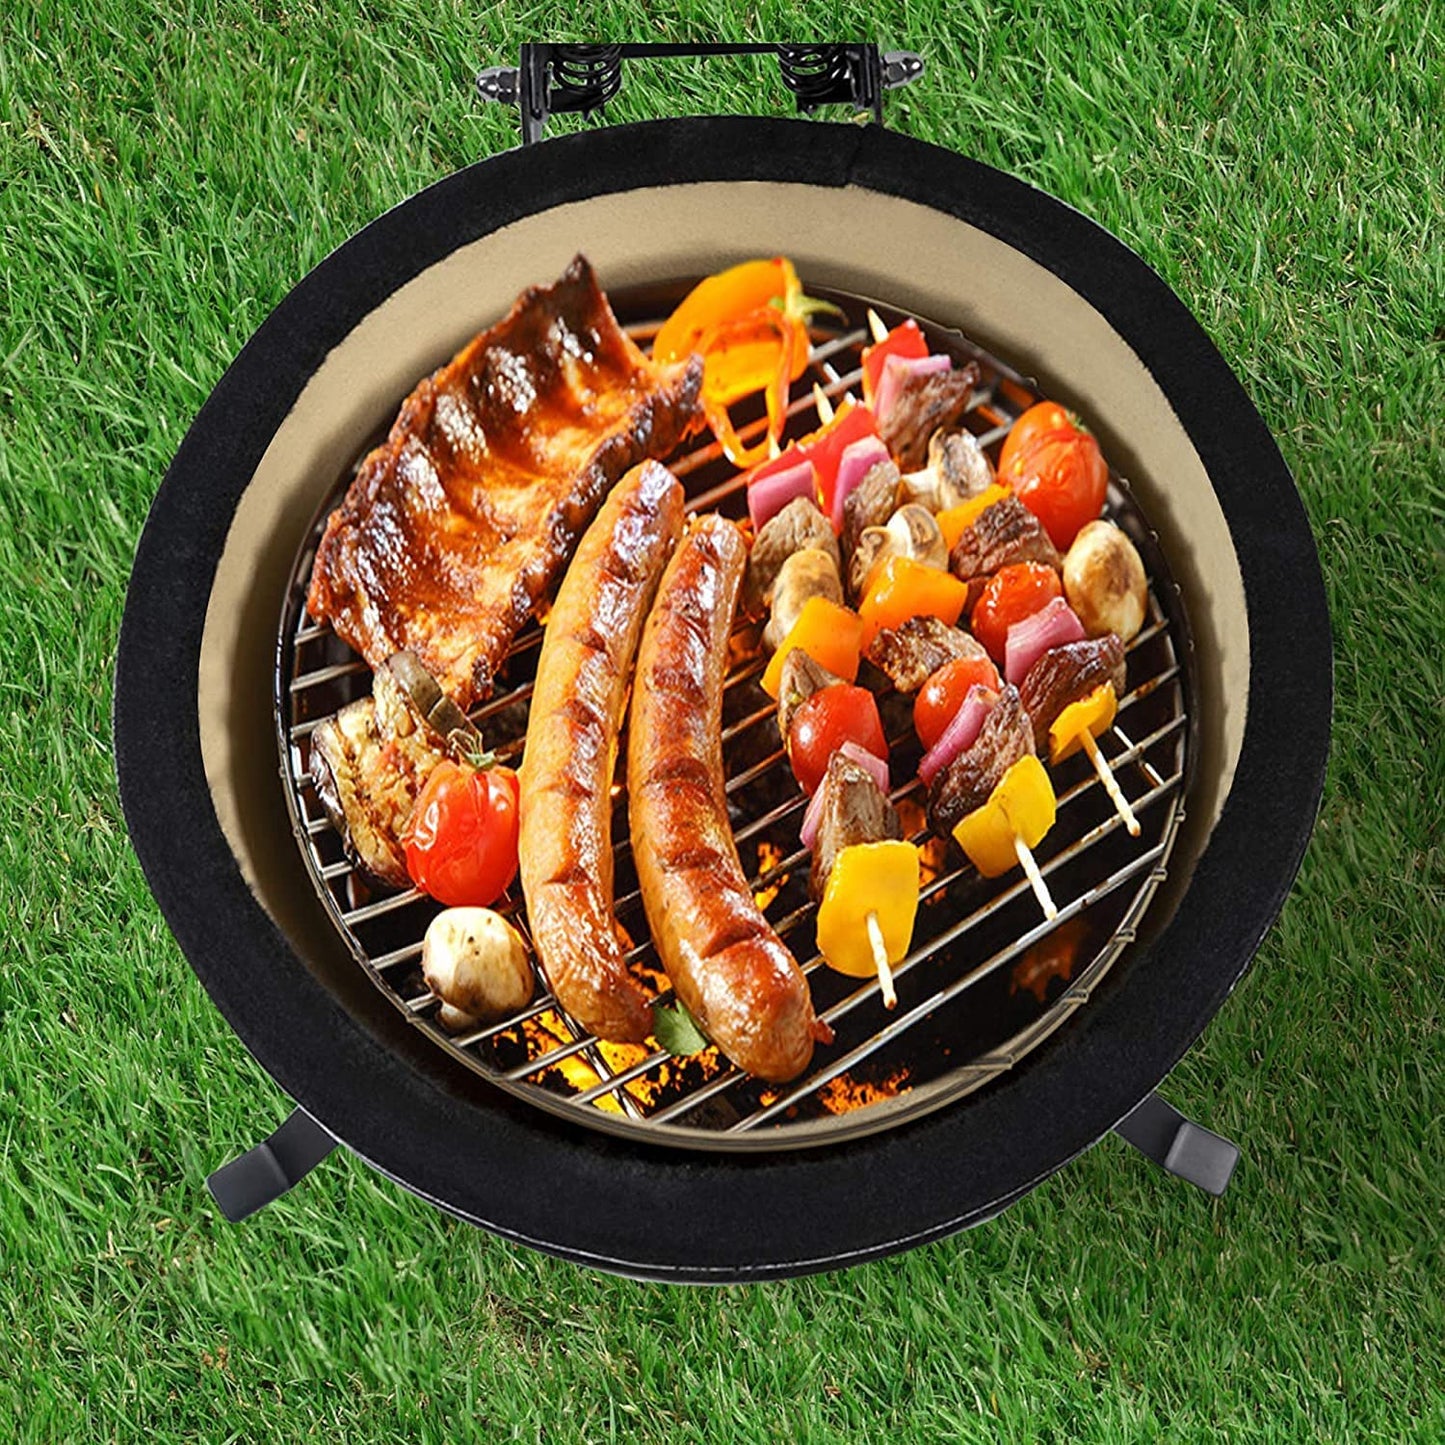 15 Inch Mini Kamado Grill Garden Ceramic Grills BBQ Smoker without Side Table-Matte black